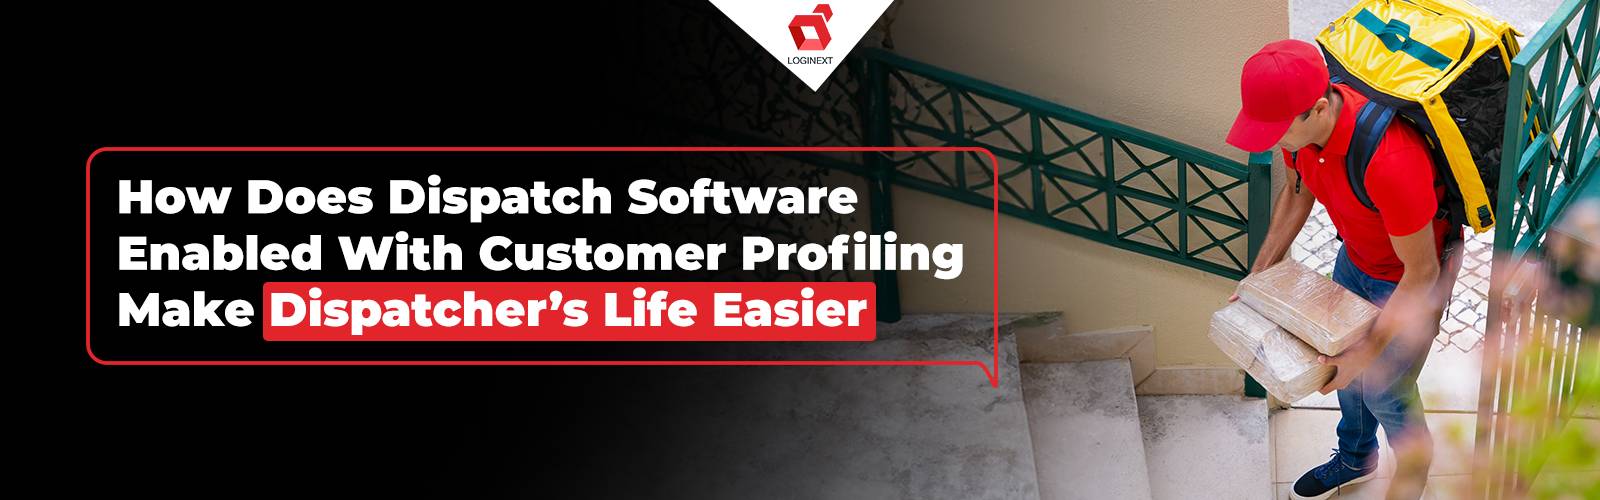 Dispatch Software and Customer Profiling Importance in Business Today